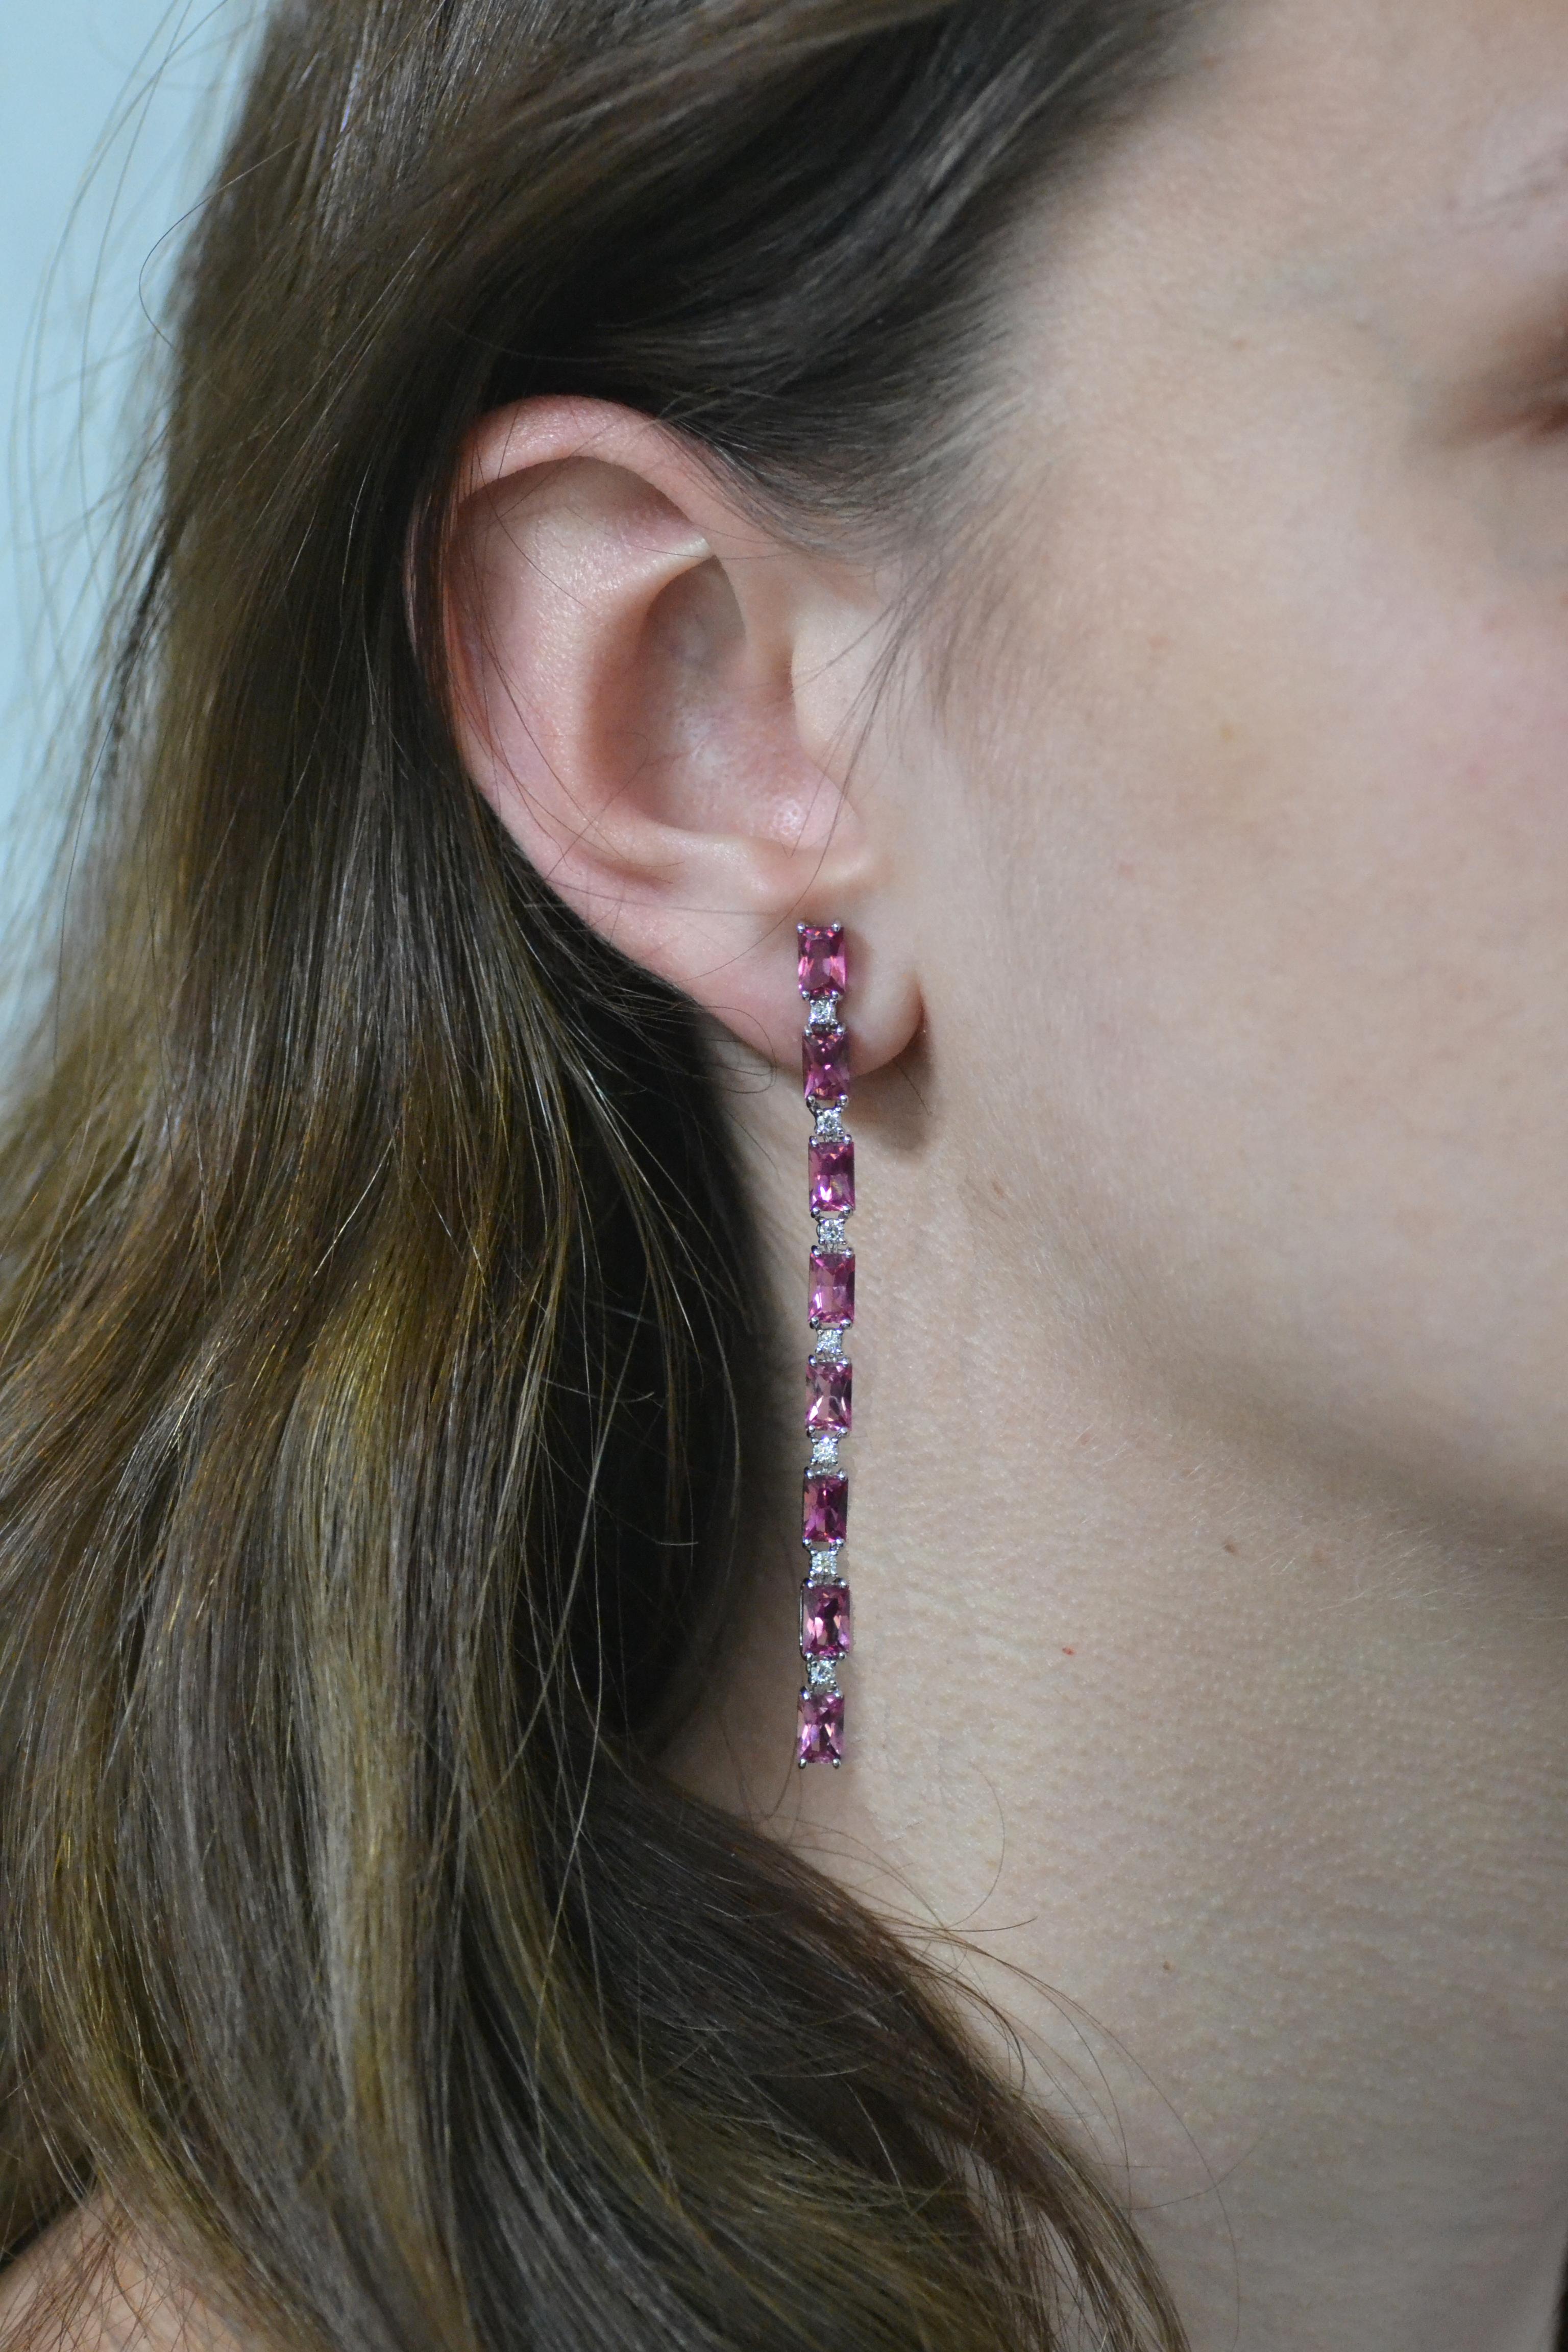 Handmade in Italy, in Margherita Burgener workshop, the elegant pair of earrings feature a line of 8 baguette cut natural pink tourmalines, alternated to a single diamond (carat 0.035)
Flexible, light, elegant, a pair of earrings you will love 


18